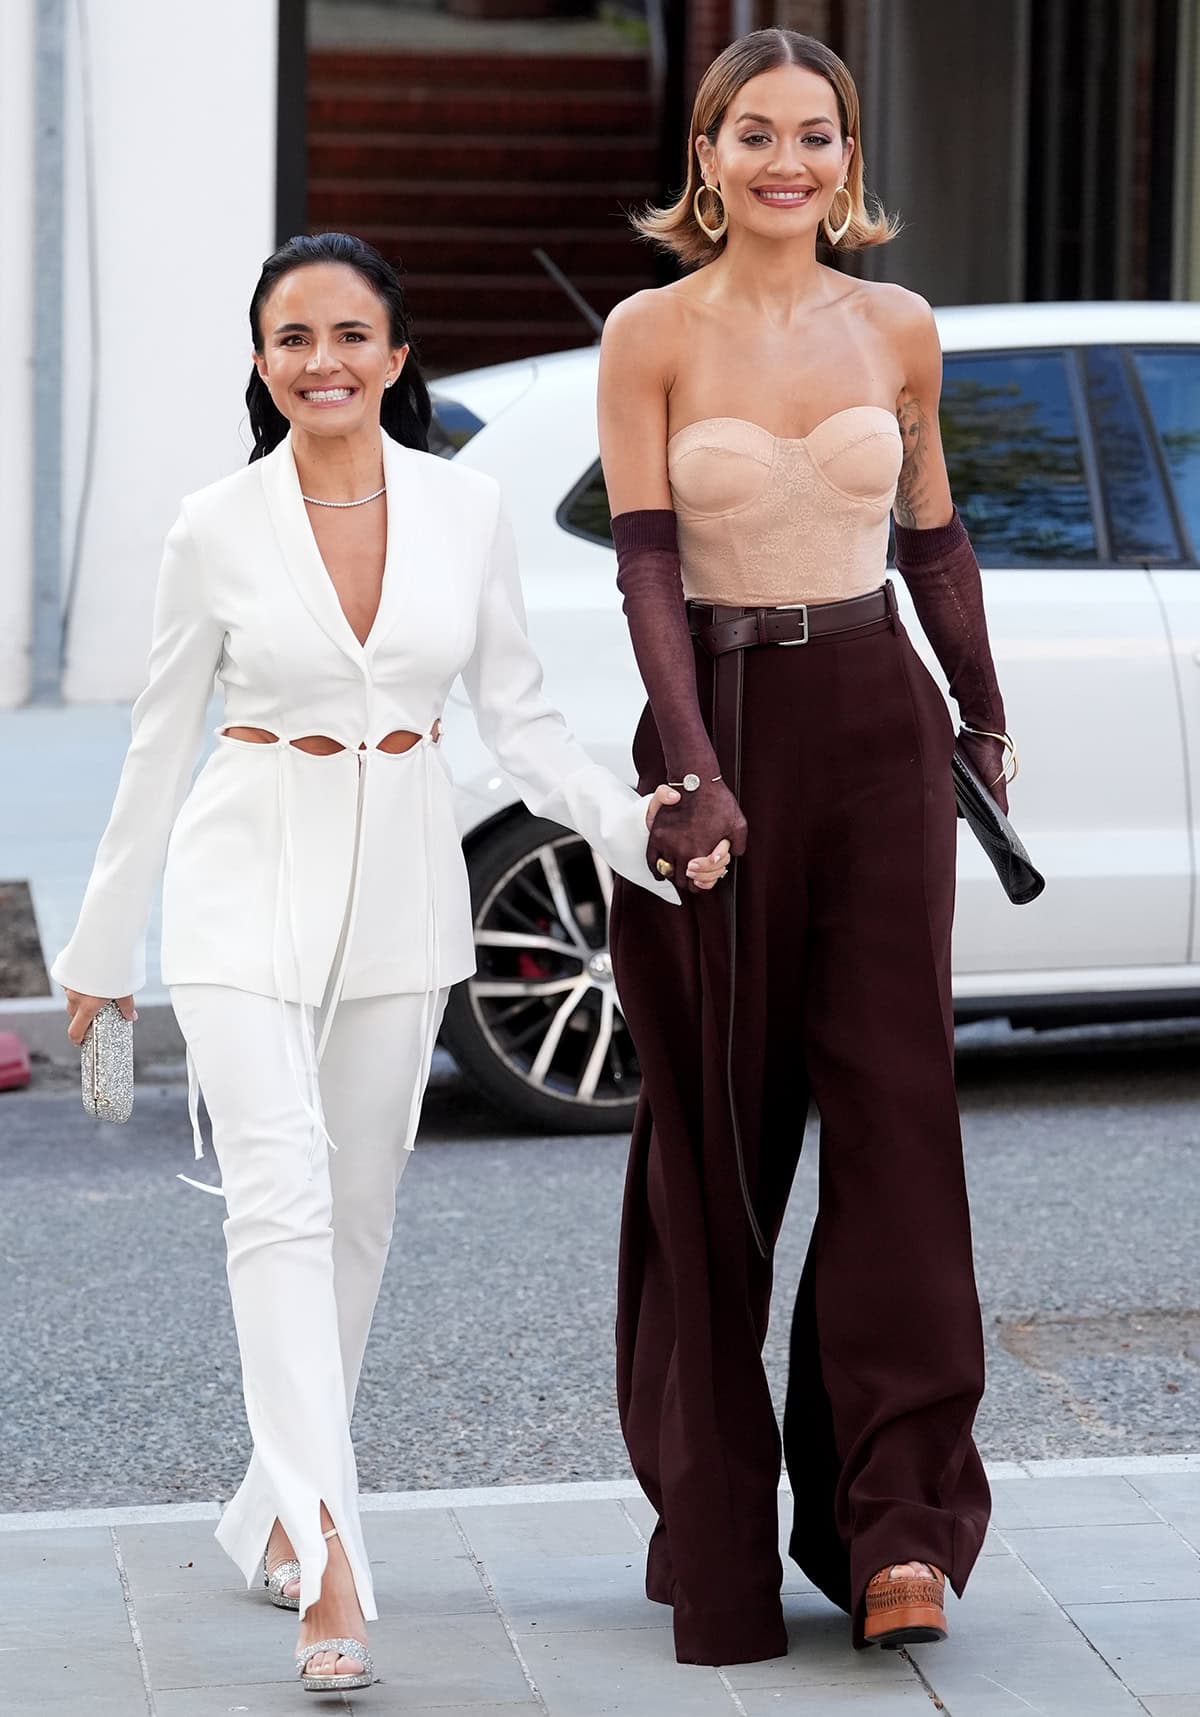 Anna Lahey, Vida Glow founder, arrives at the event with her Typebea co-founder Rita Ora in a white cutout suit